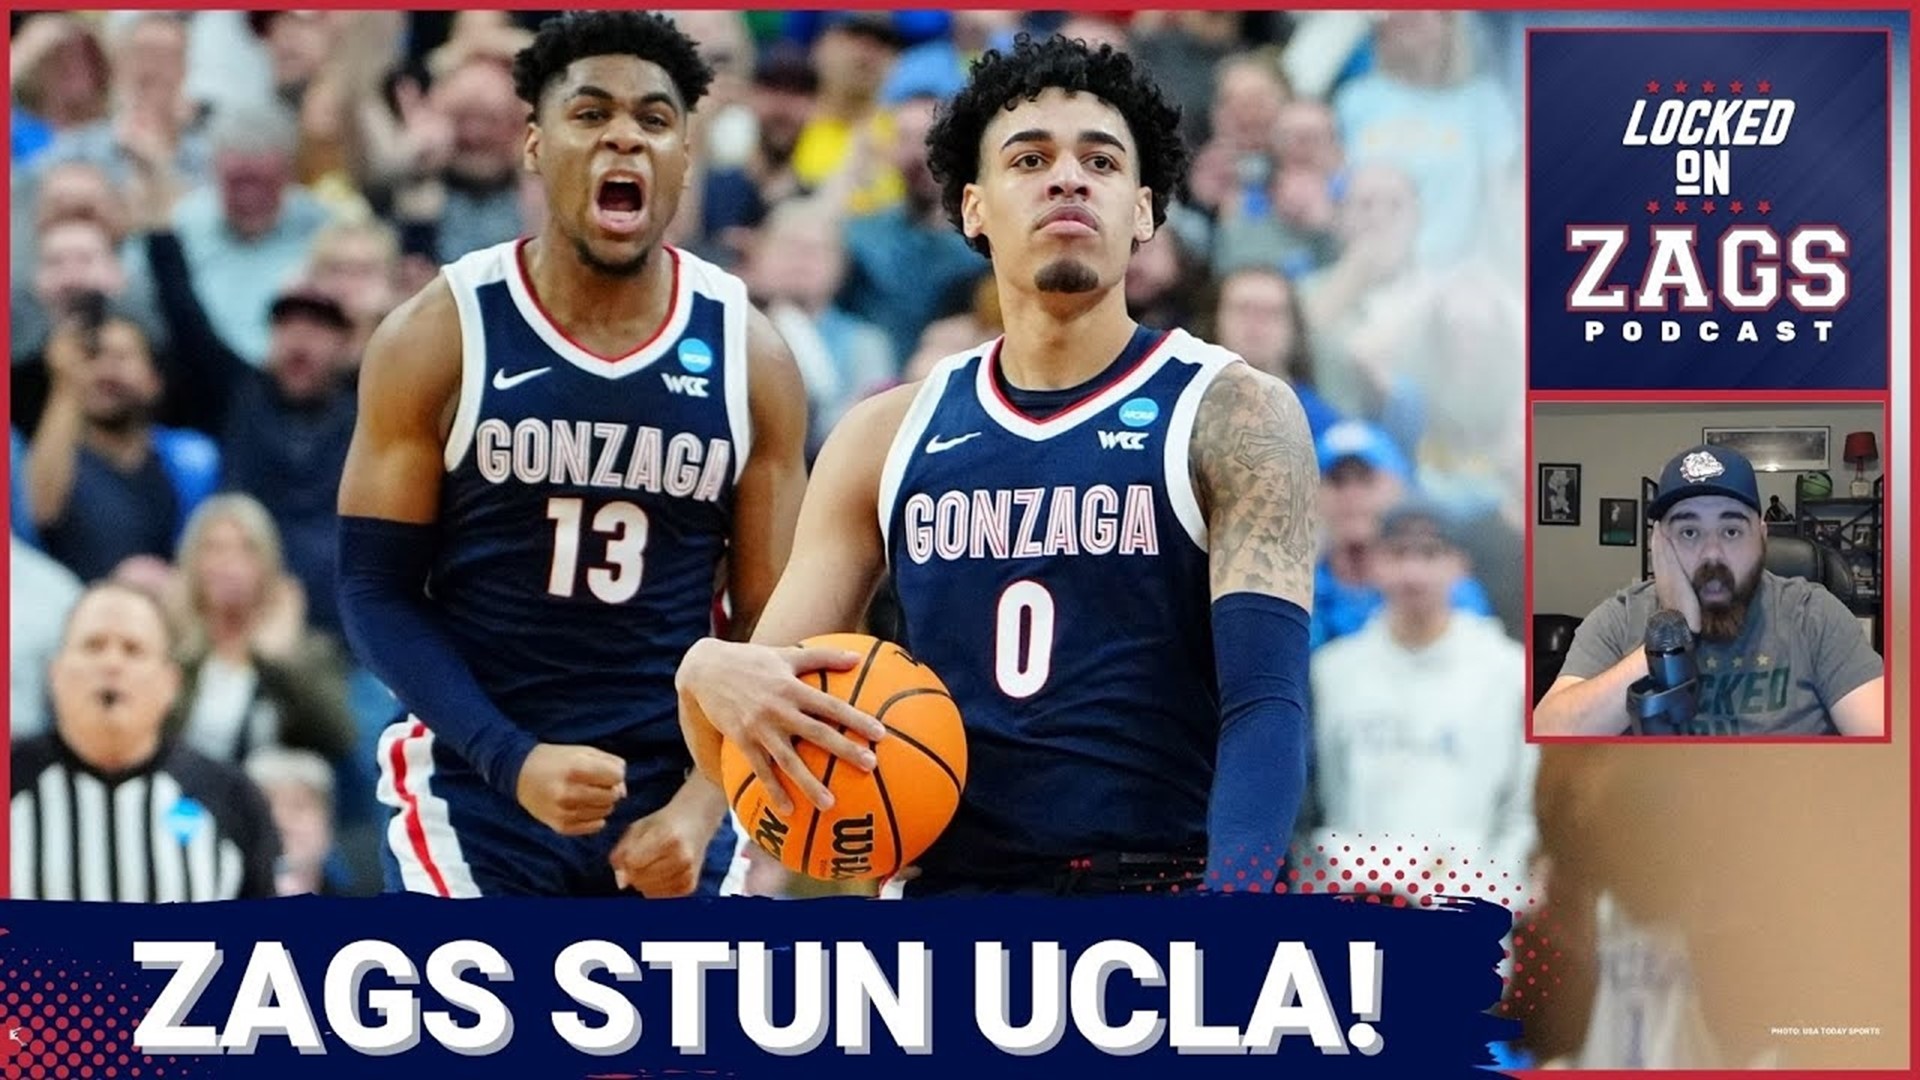 We discuss Gonzaga's backcourt struggles, why it was great to see so much Malachi Smith and Hunter Sallis in the second half, how far up the scoring list Drew Timme